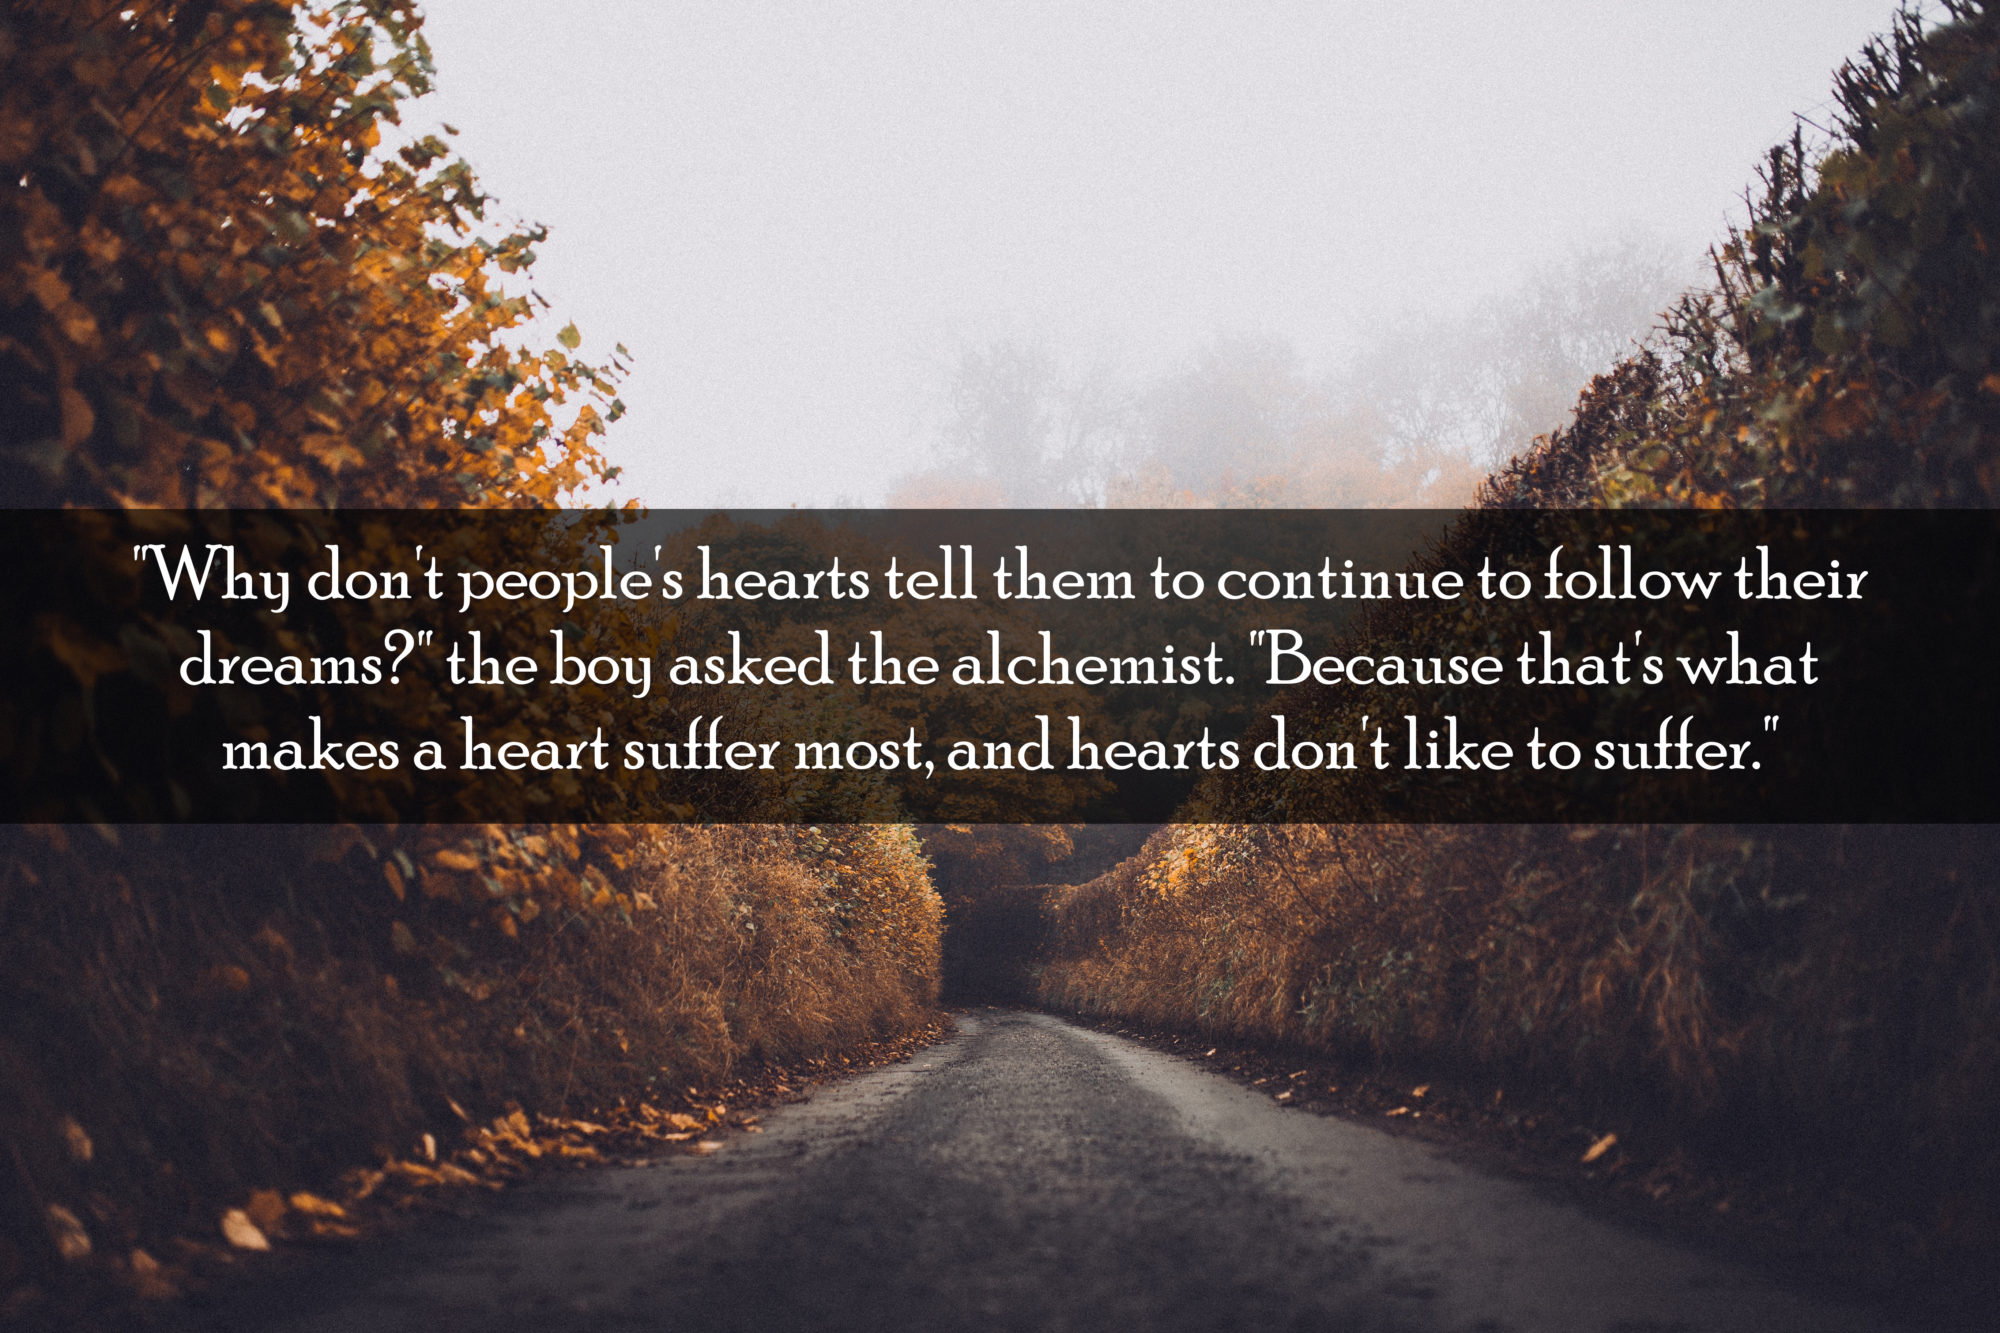 10 inspirational quotes from "The Alchemist", by Paulo Coelho